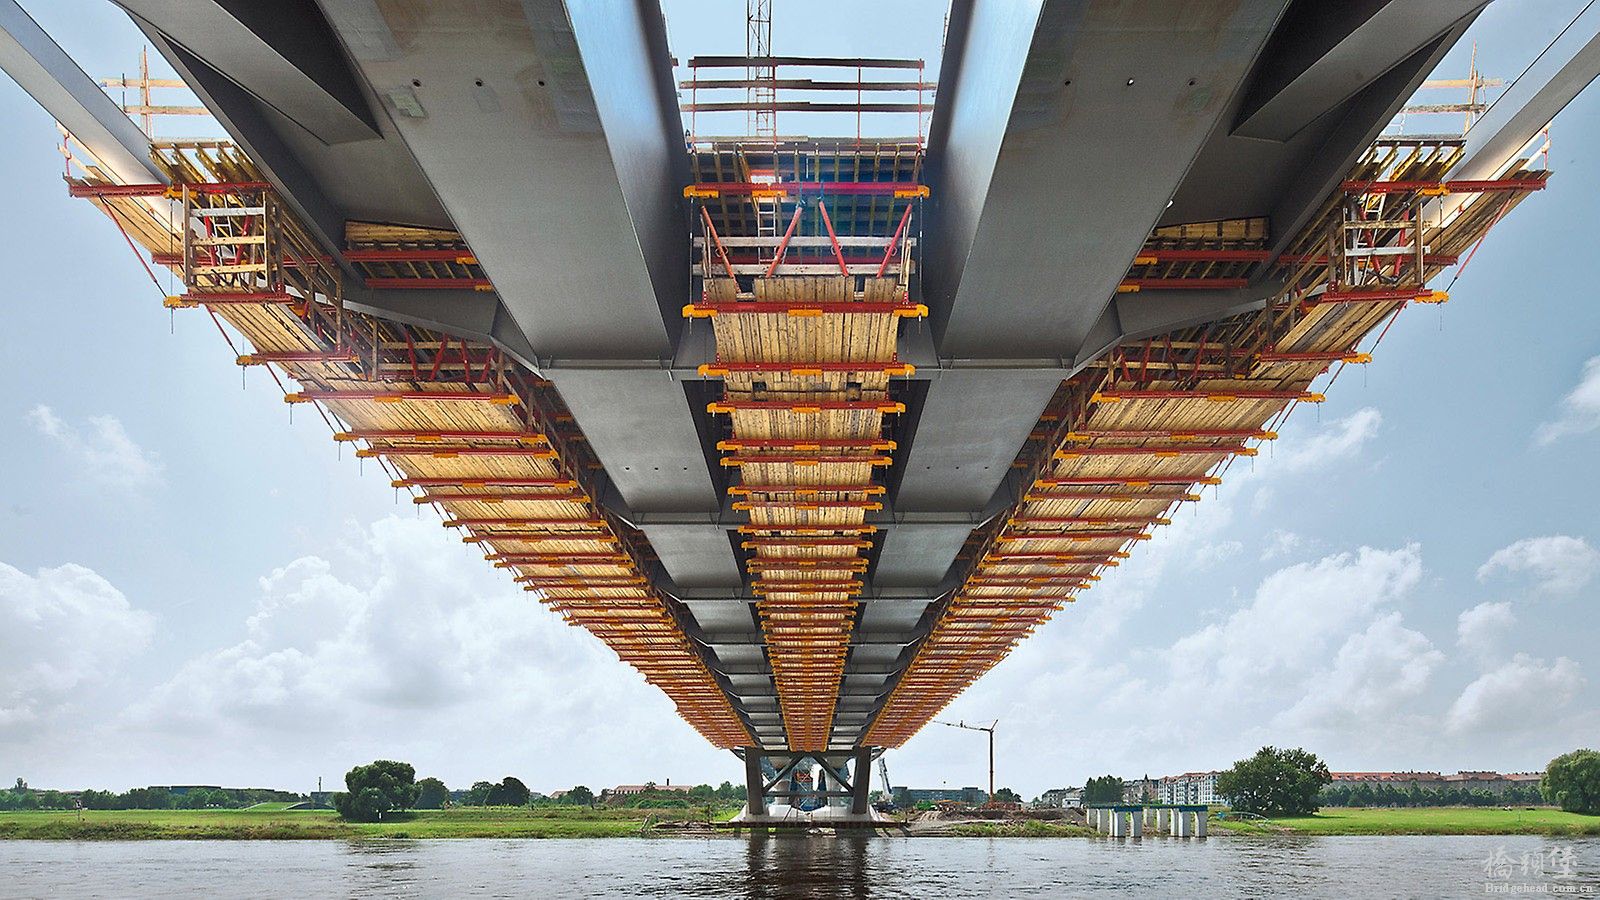 the-carriageway-slab-of-the-steel-composite-bridge-was-constructed-in-21-concret.jpg